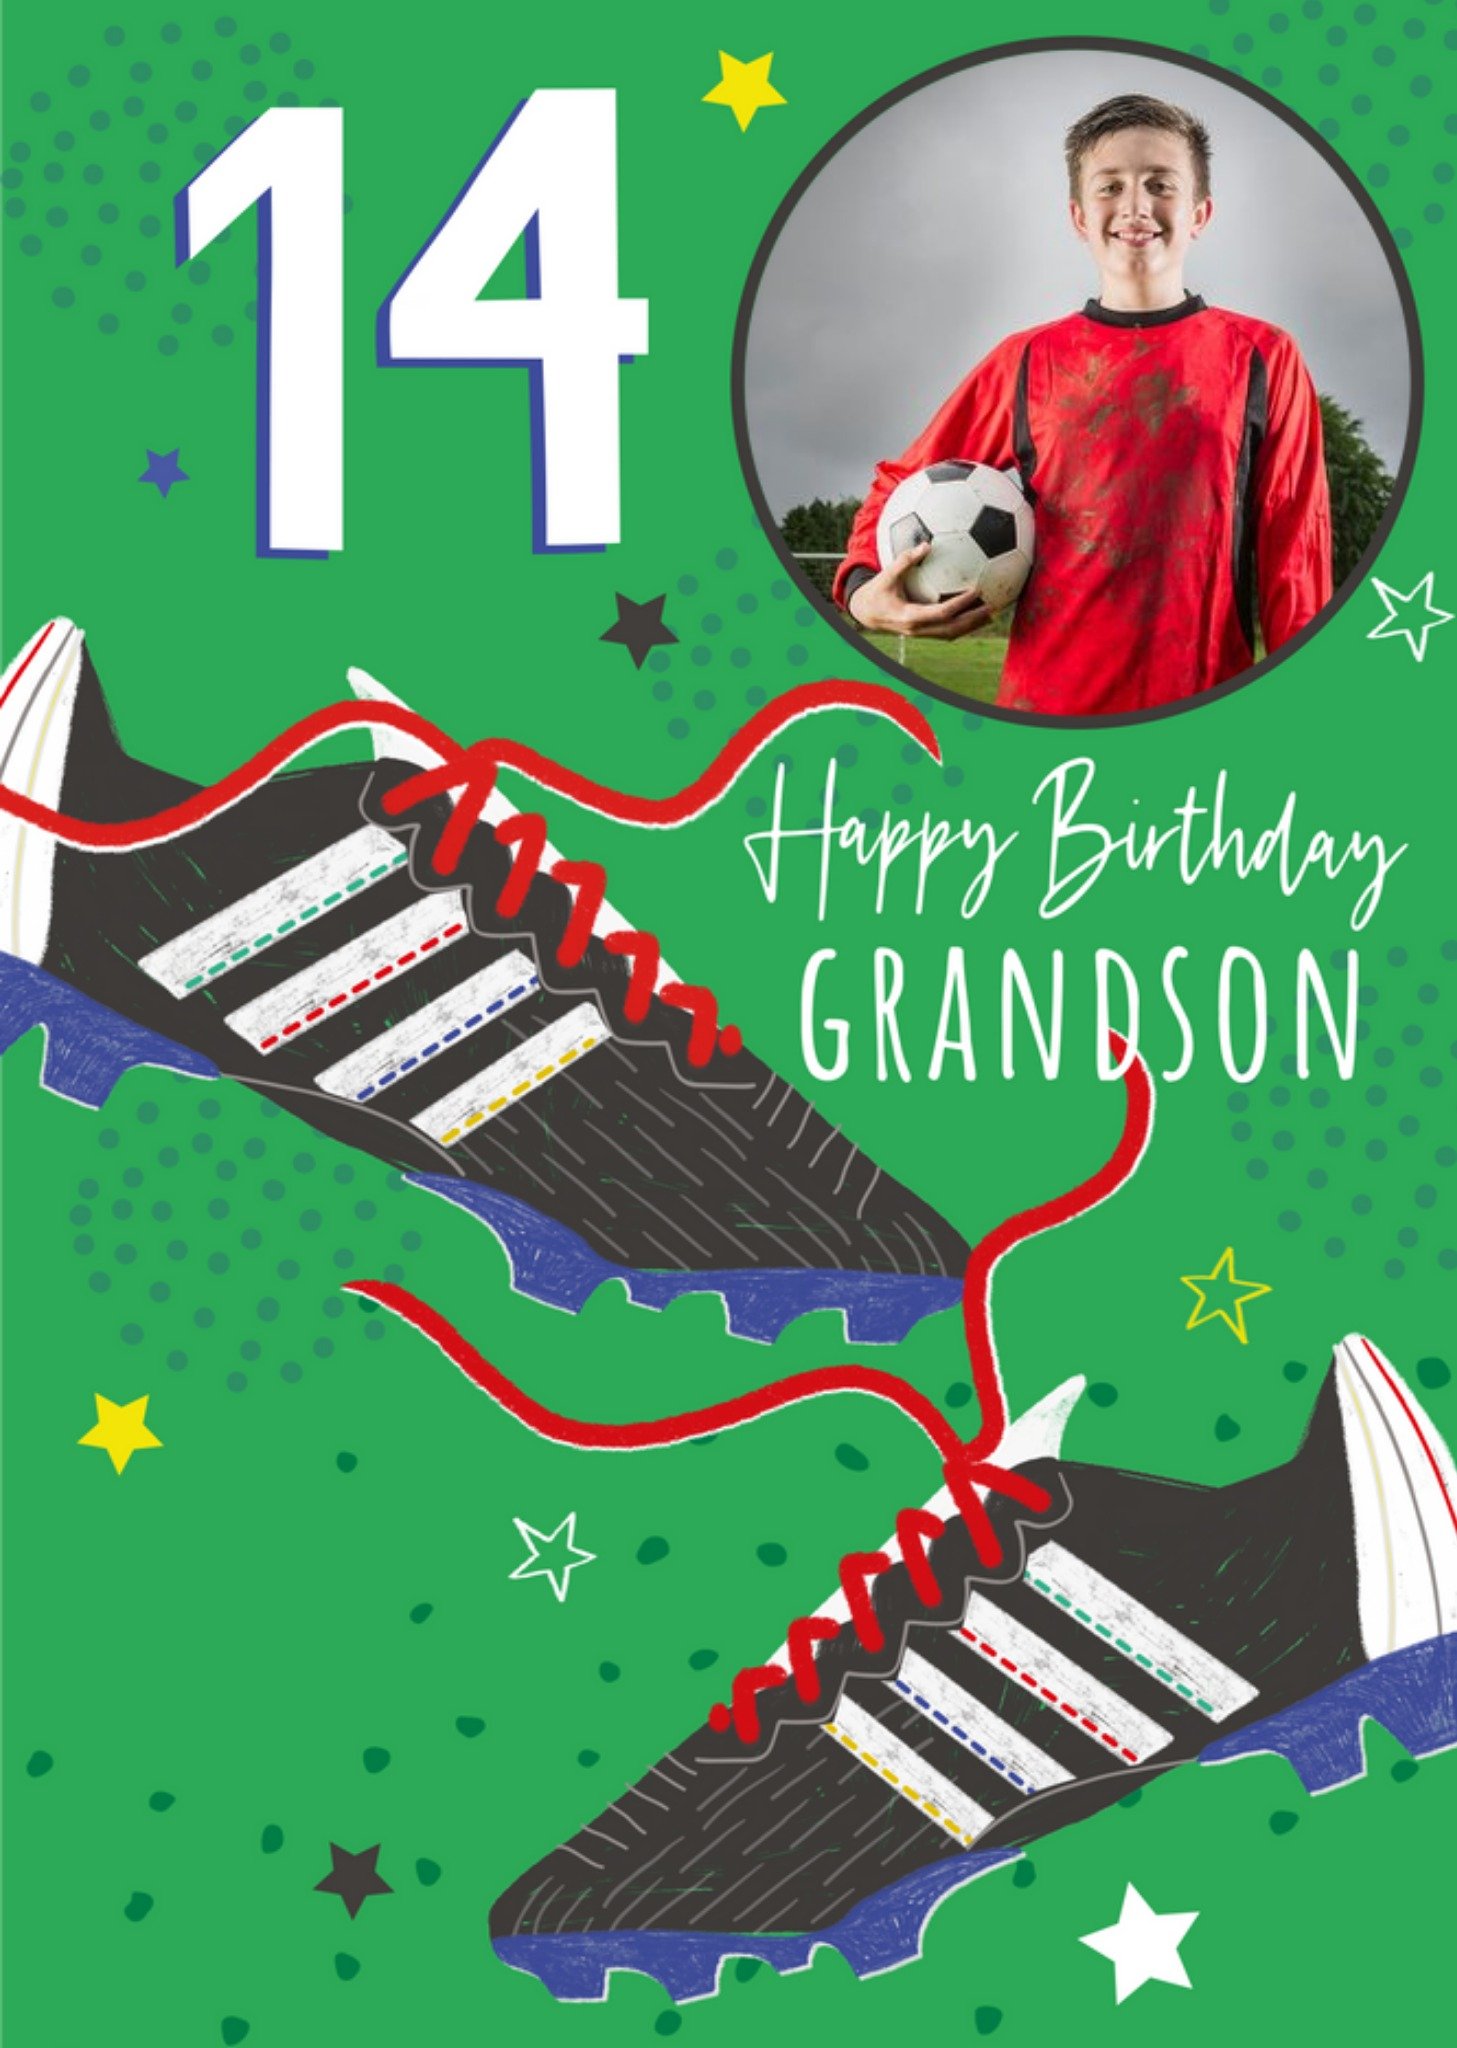 Moonpig Football Shoes Personalise Age And Photo Upload Birthday Card Ecard